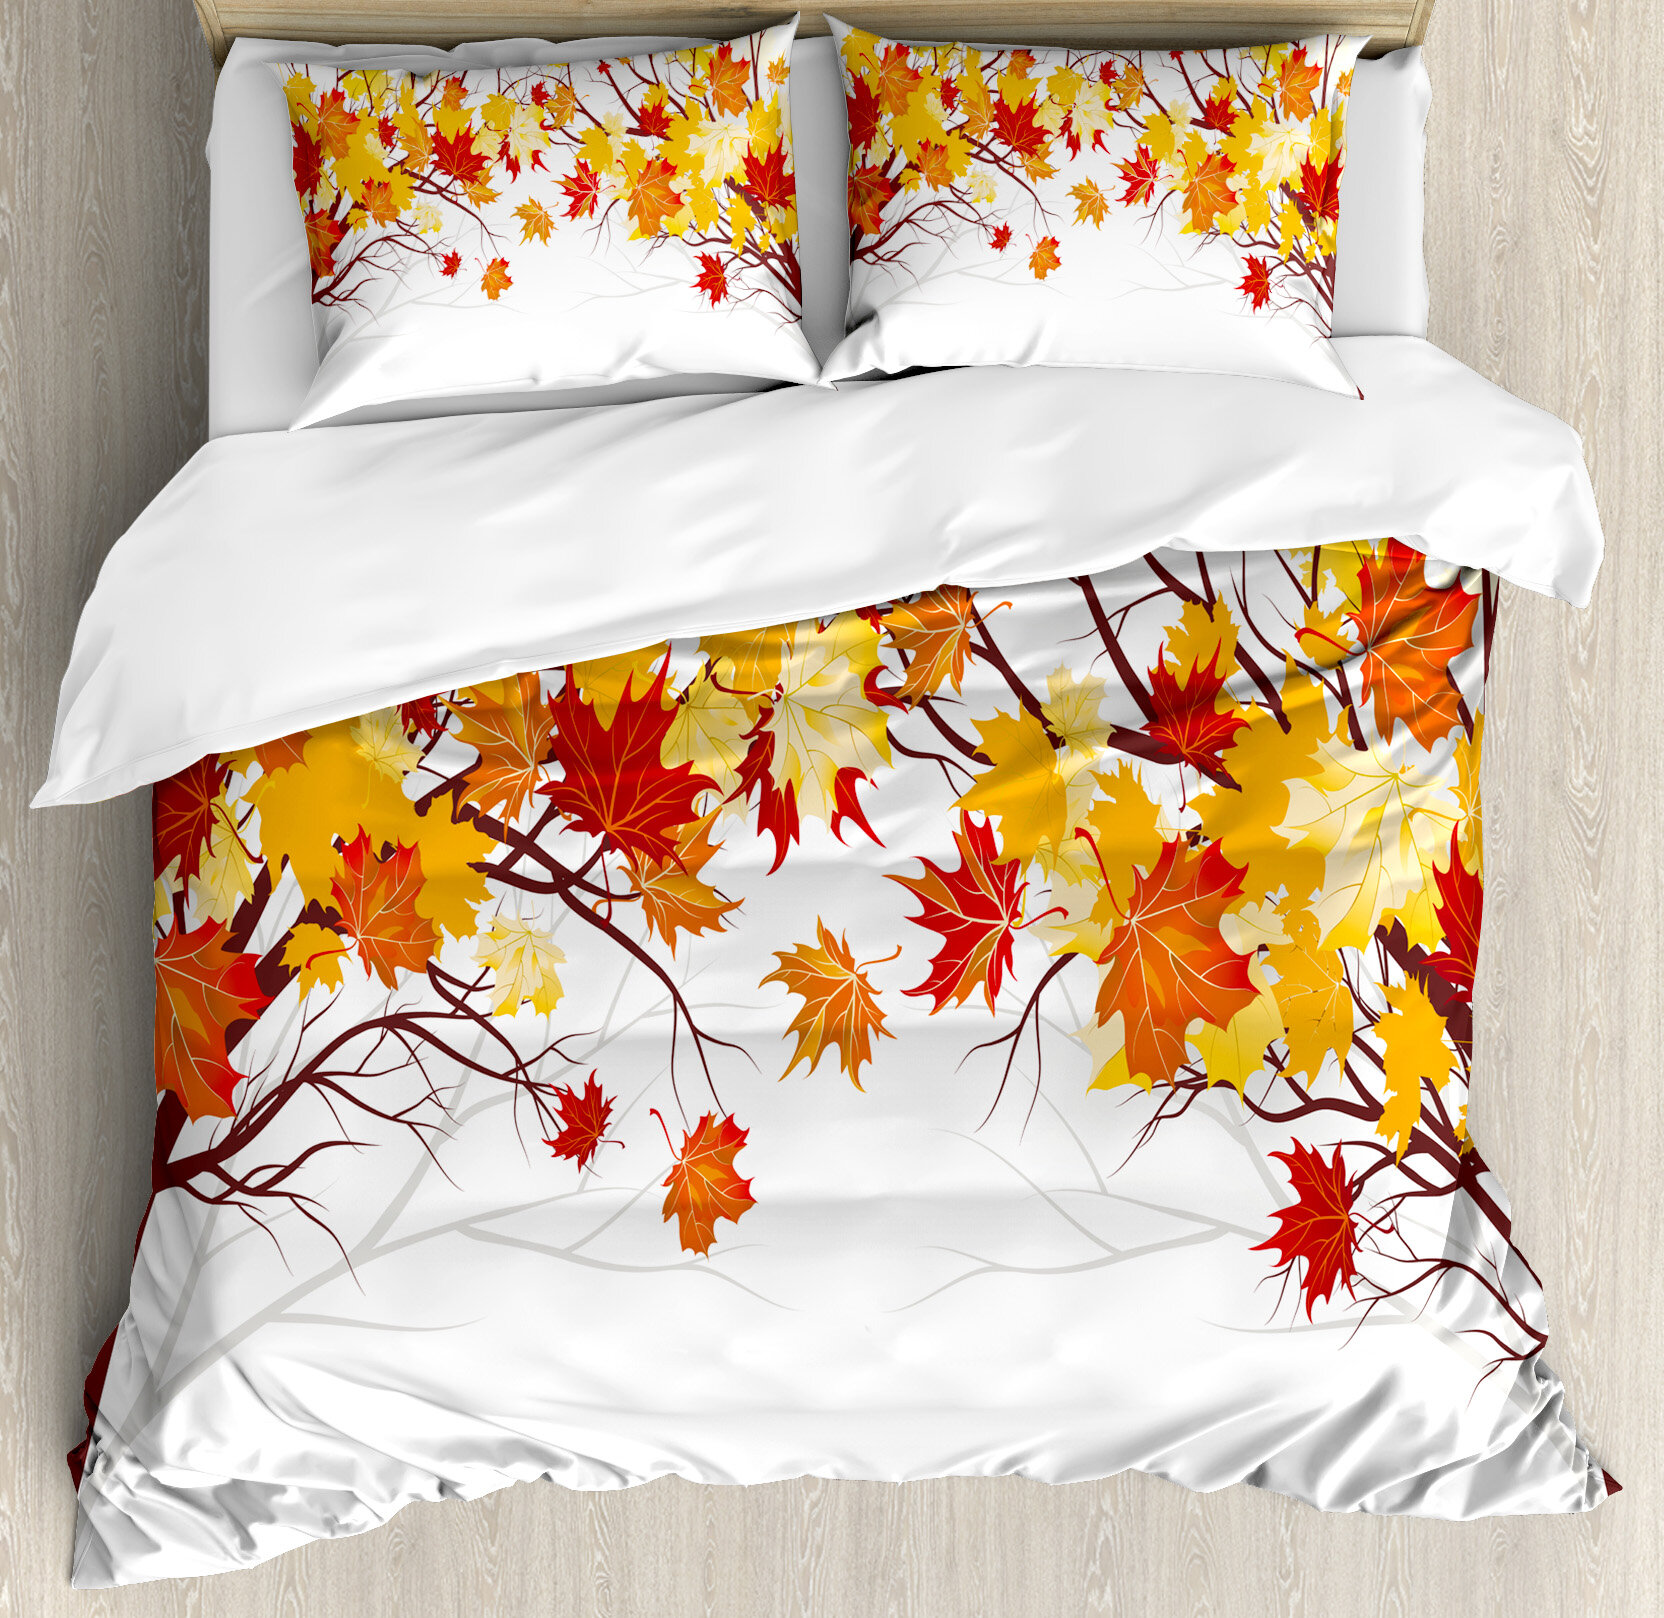 East Urban Home Fall Image Of Canadian Maple Leaves In With Soft